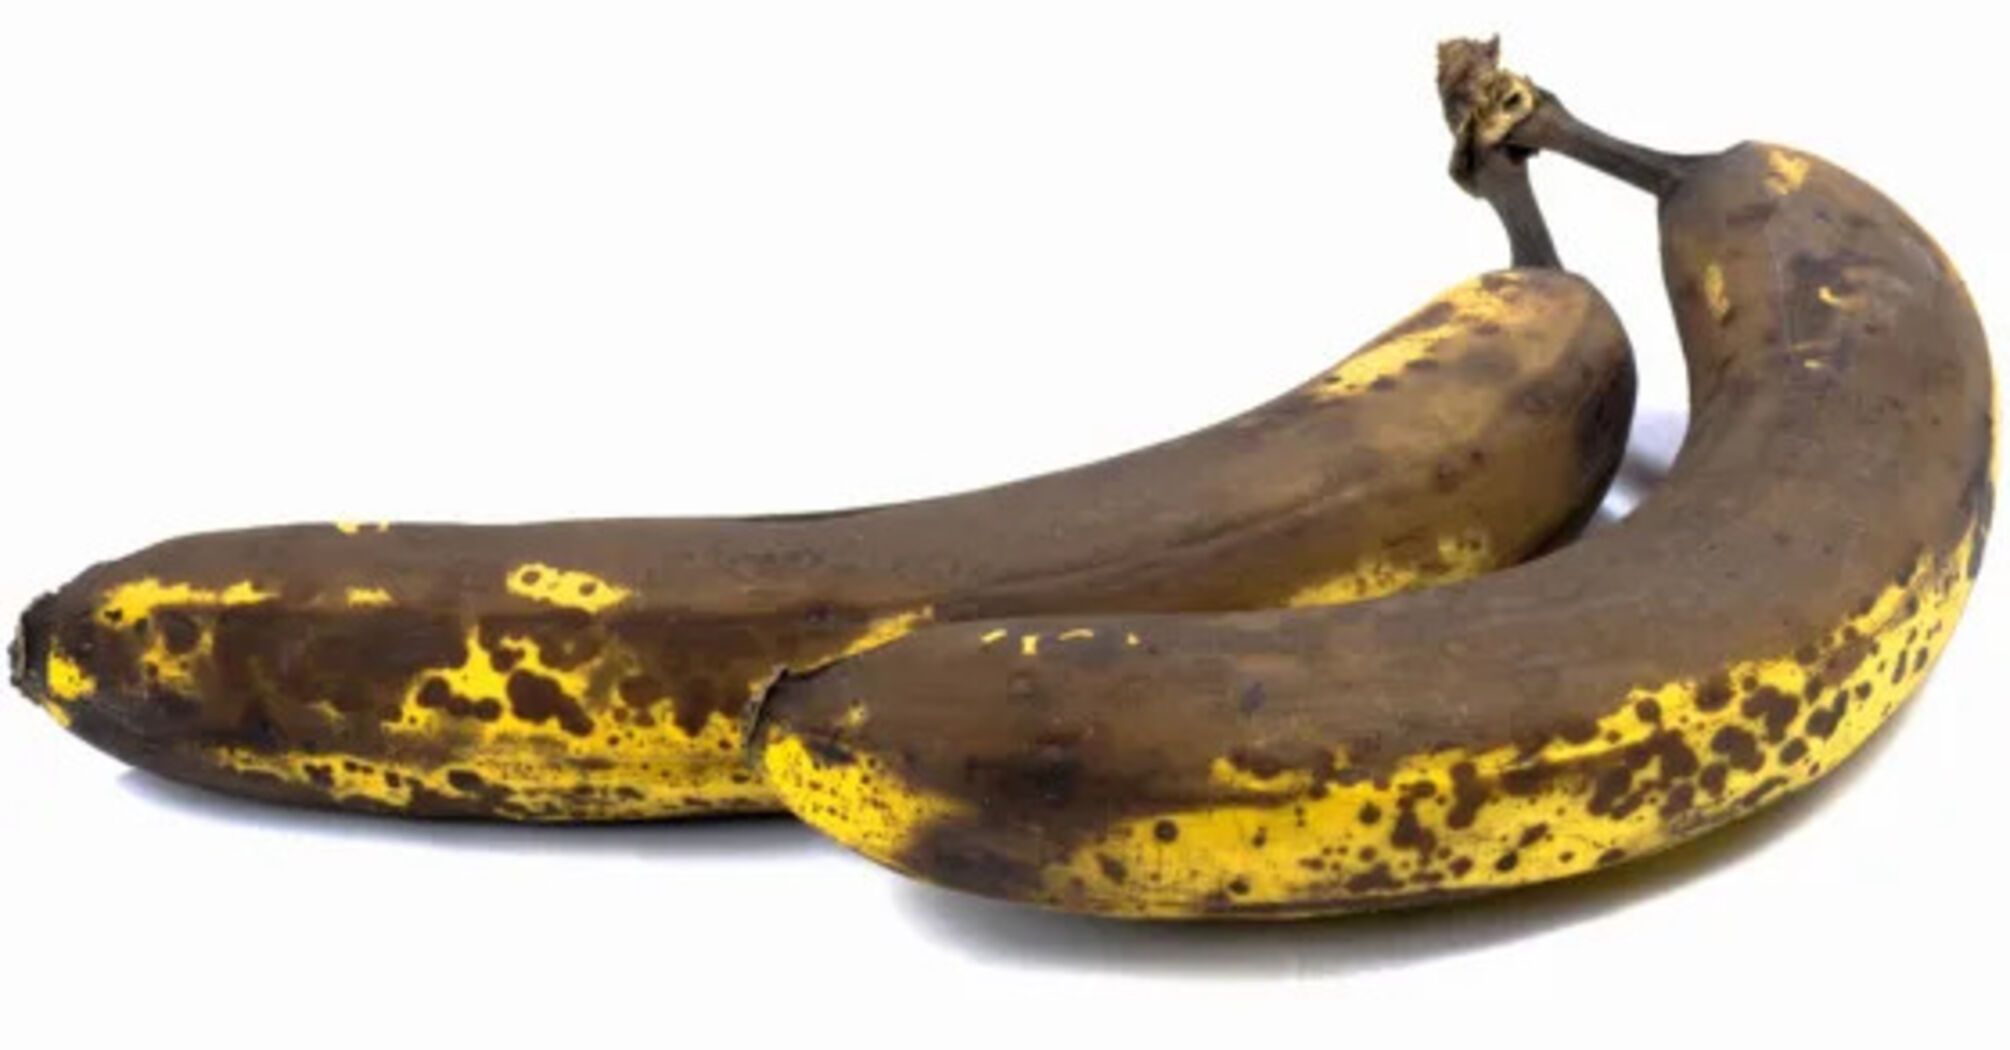 How to prevent bananas from turning black